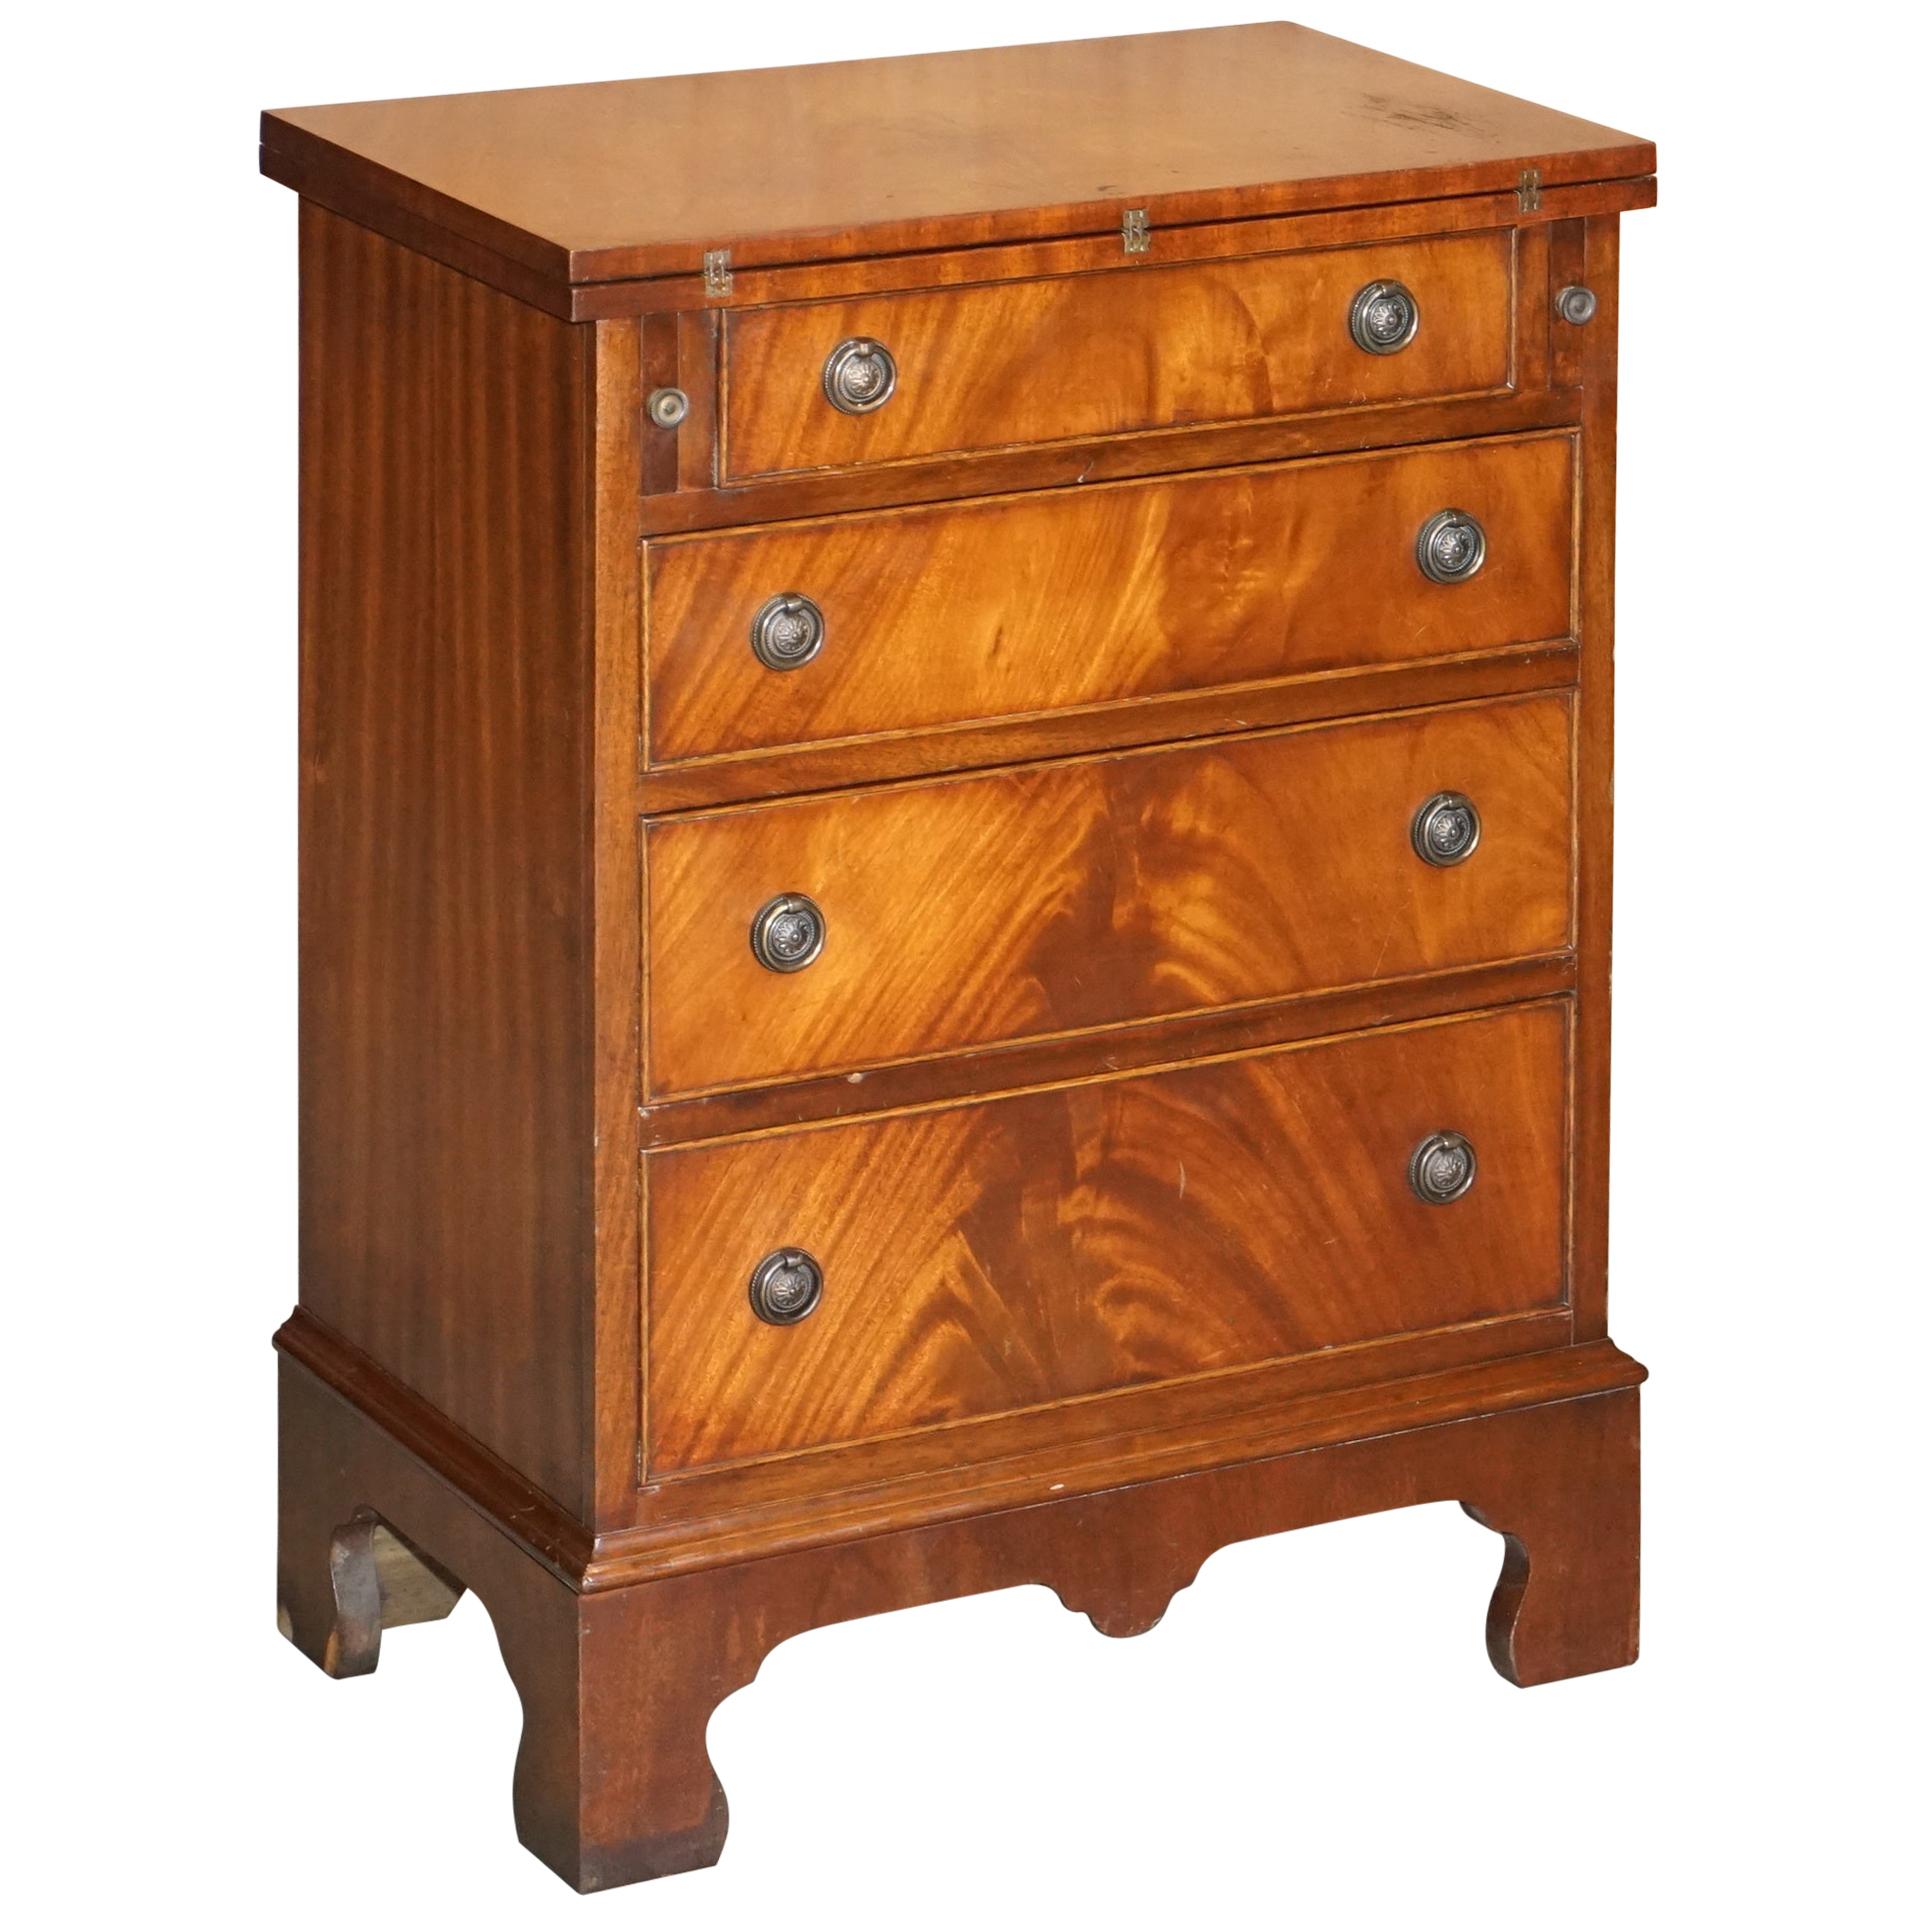 Lovely Flamed Hardwood Batchelors Chest of Drawers with Folding Butlers Shelf